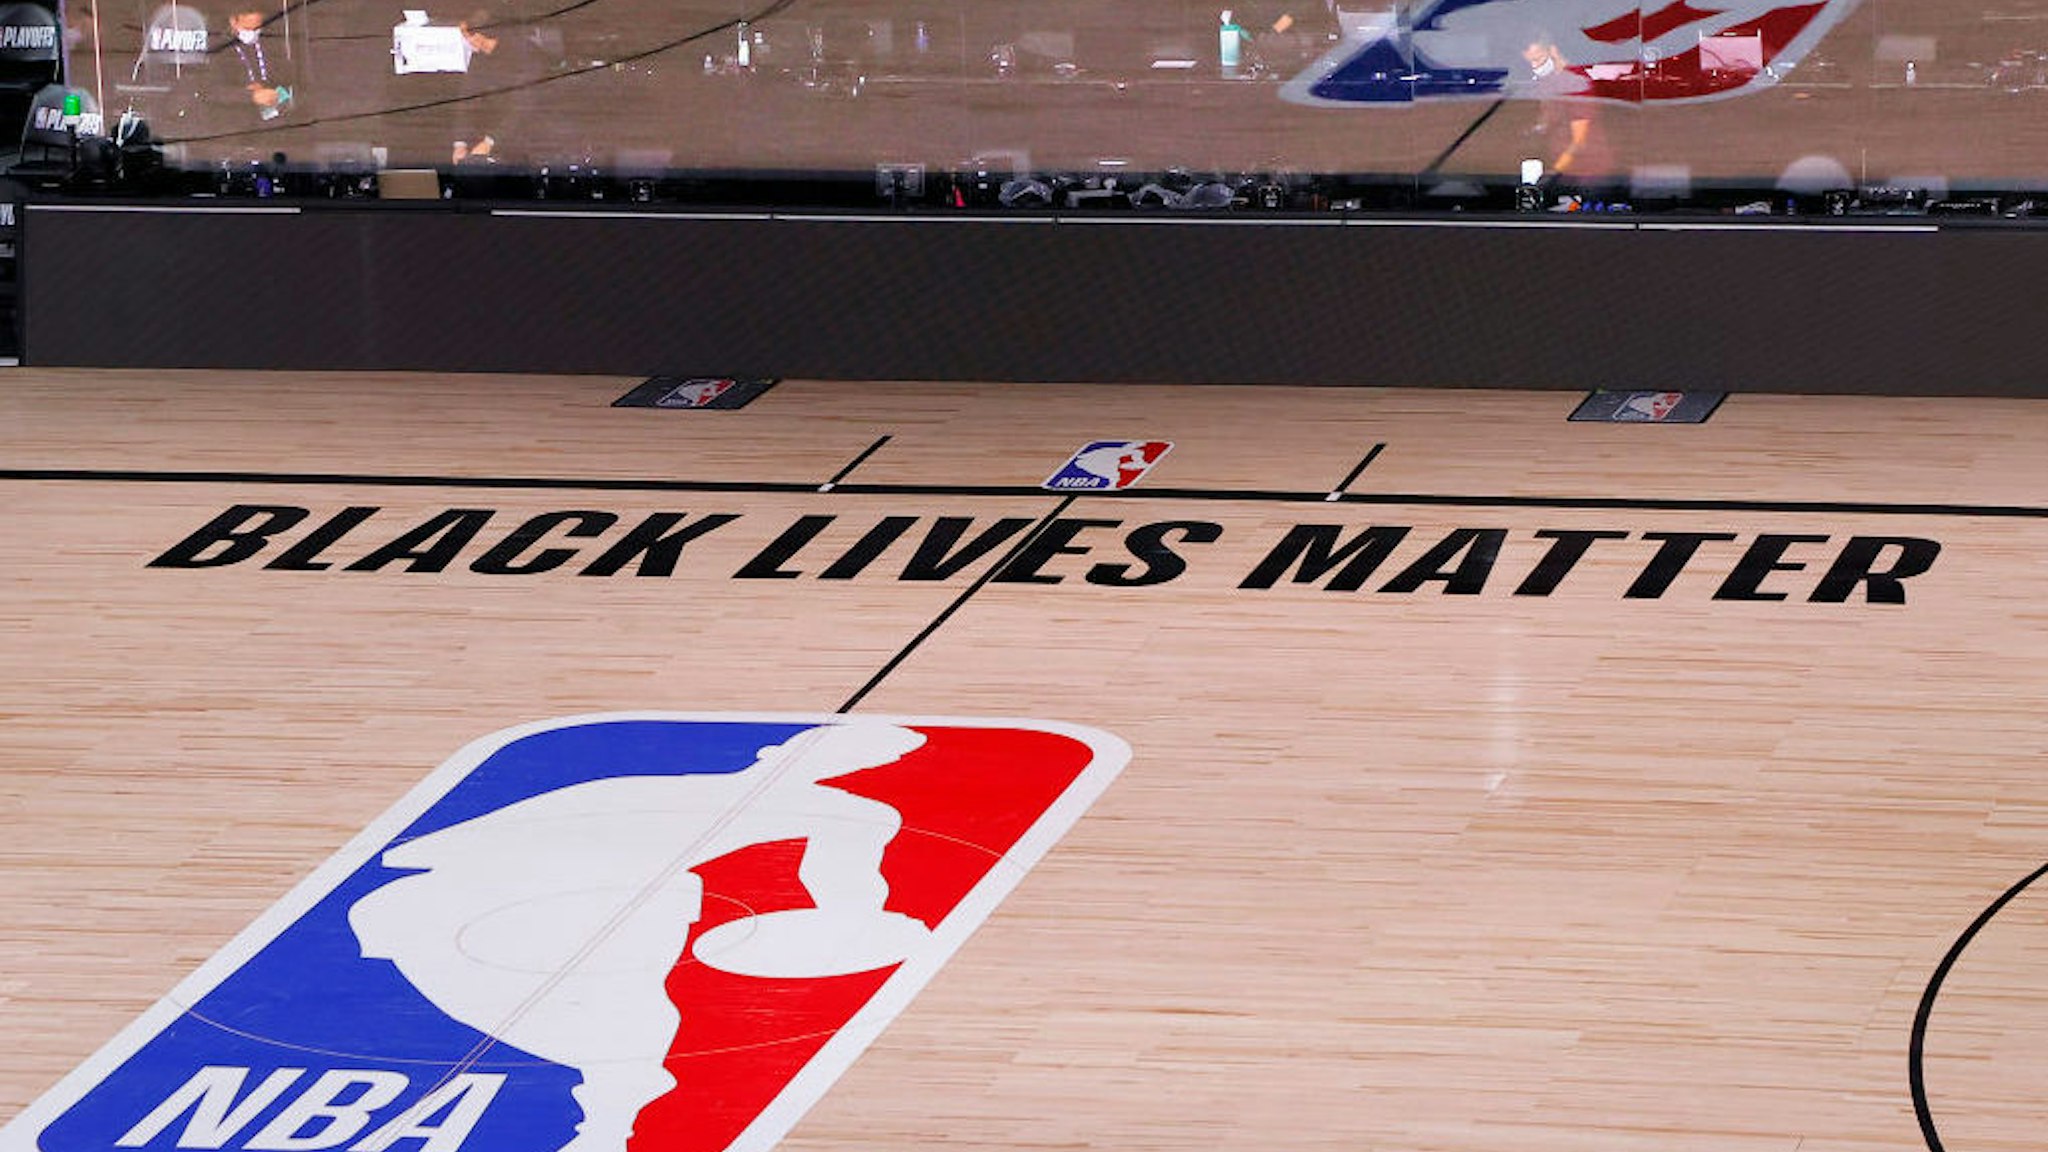 LAKE BUENA VISTA, FLORIDA - AUGUST 26: An empty court and bench is shown with no signage following the scheduled start time in Game Five of the Eastern Conference First Round between the Milwaukee Bucks and the Orlando Magic during the 2020 NBA Playoffs at AdventHealth Arena at ESPN Wide World Of Sports Complex on August 26, 2020 in Lake Buena Vista, Florida. The Milwaukee Buck have boycotted game 5 reportedly to protest the shooting of Jacob Blake in Kenosha, Wisconsin.